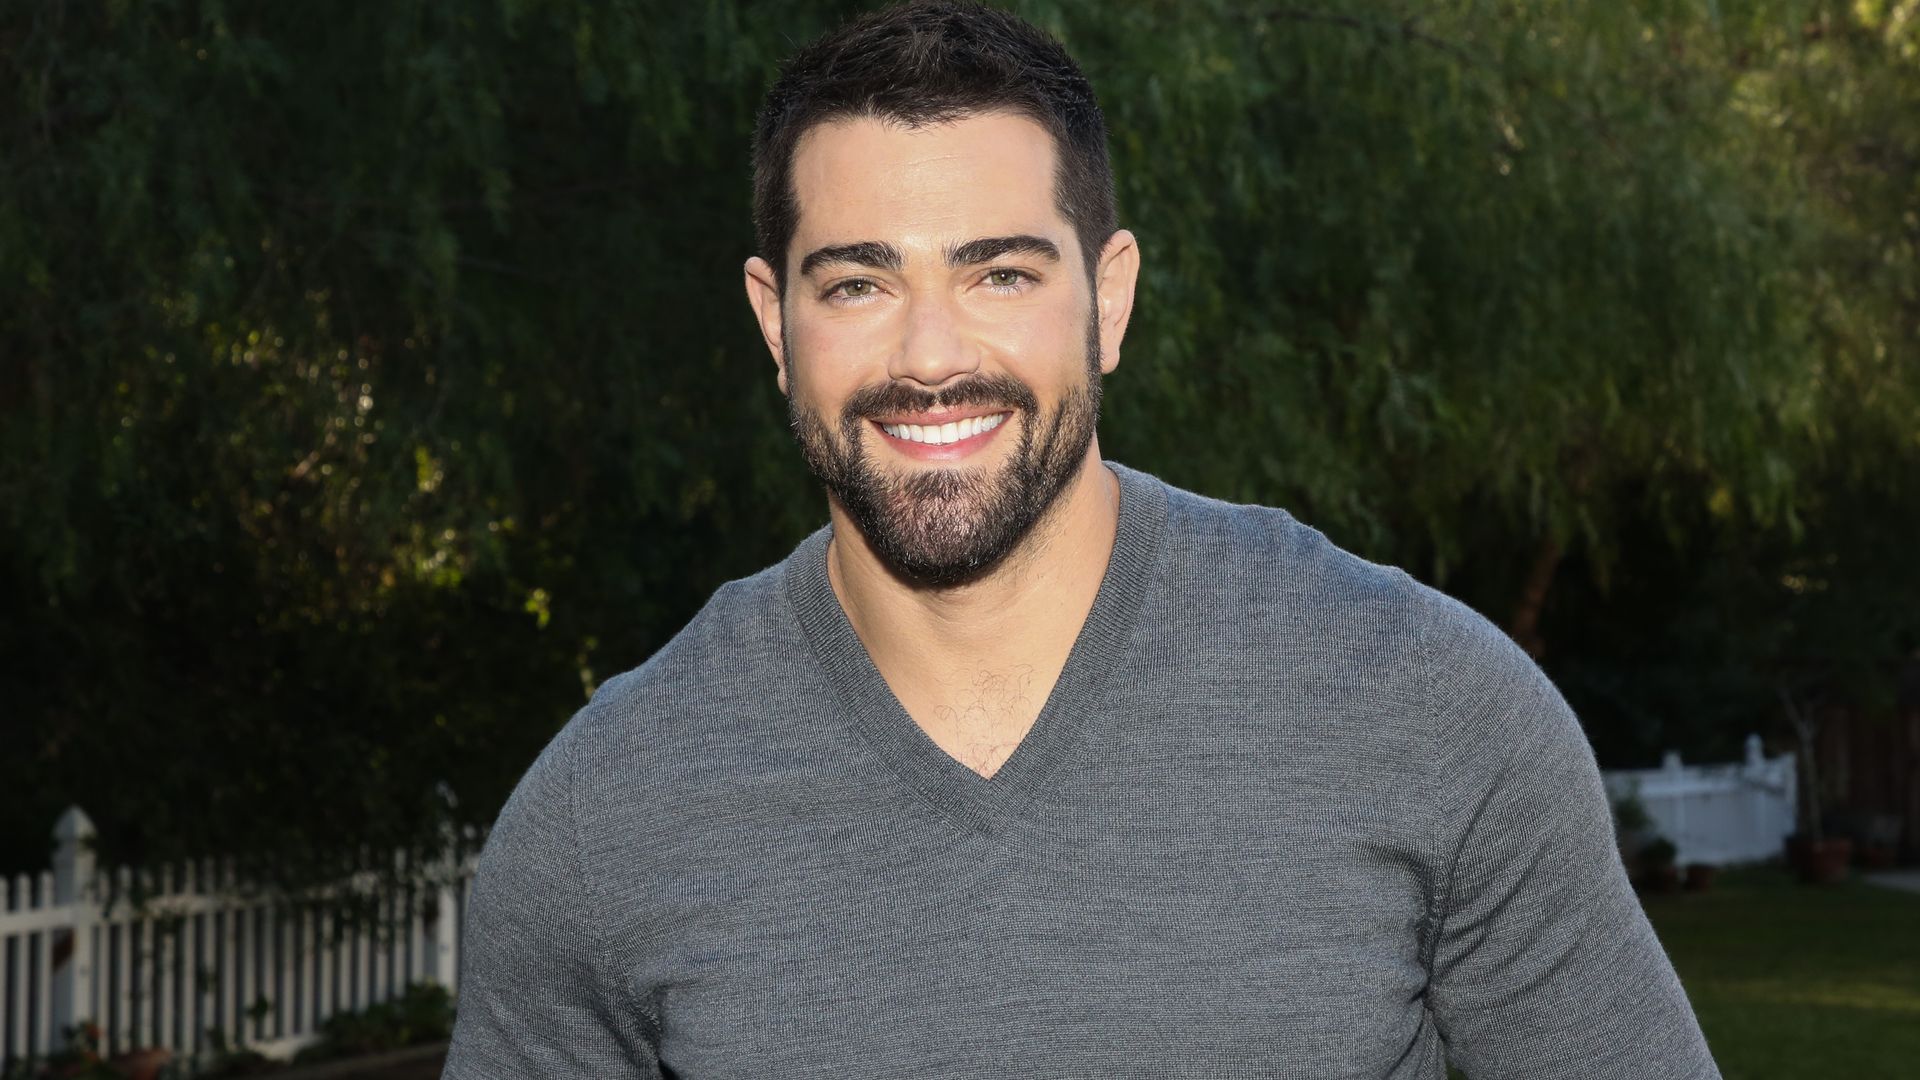 Desperate Housewives' Jesse Metcalfe shares extreme measures he put his body through - 'I was not eating'